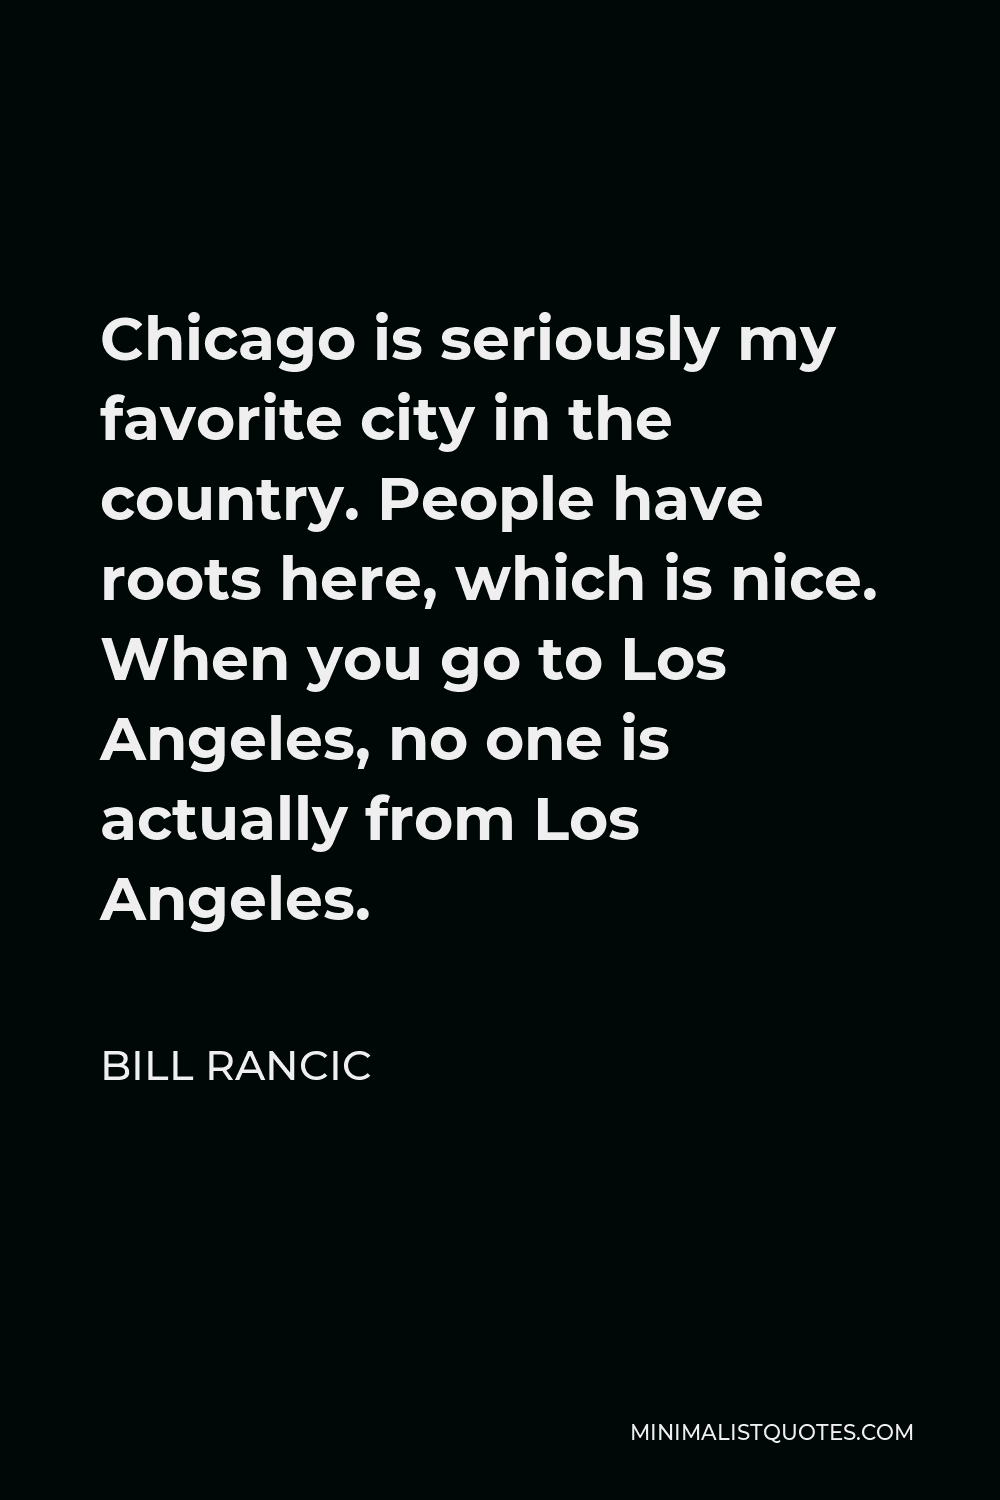 Bill Rancic Quote - Chicago is seriously my favorite city in the country. People have roots here, which is nice. When you go to Los Angeles, no one is actually from Los Angeles.